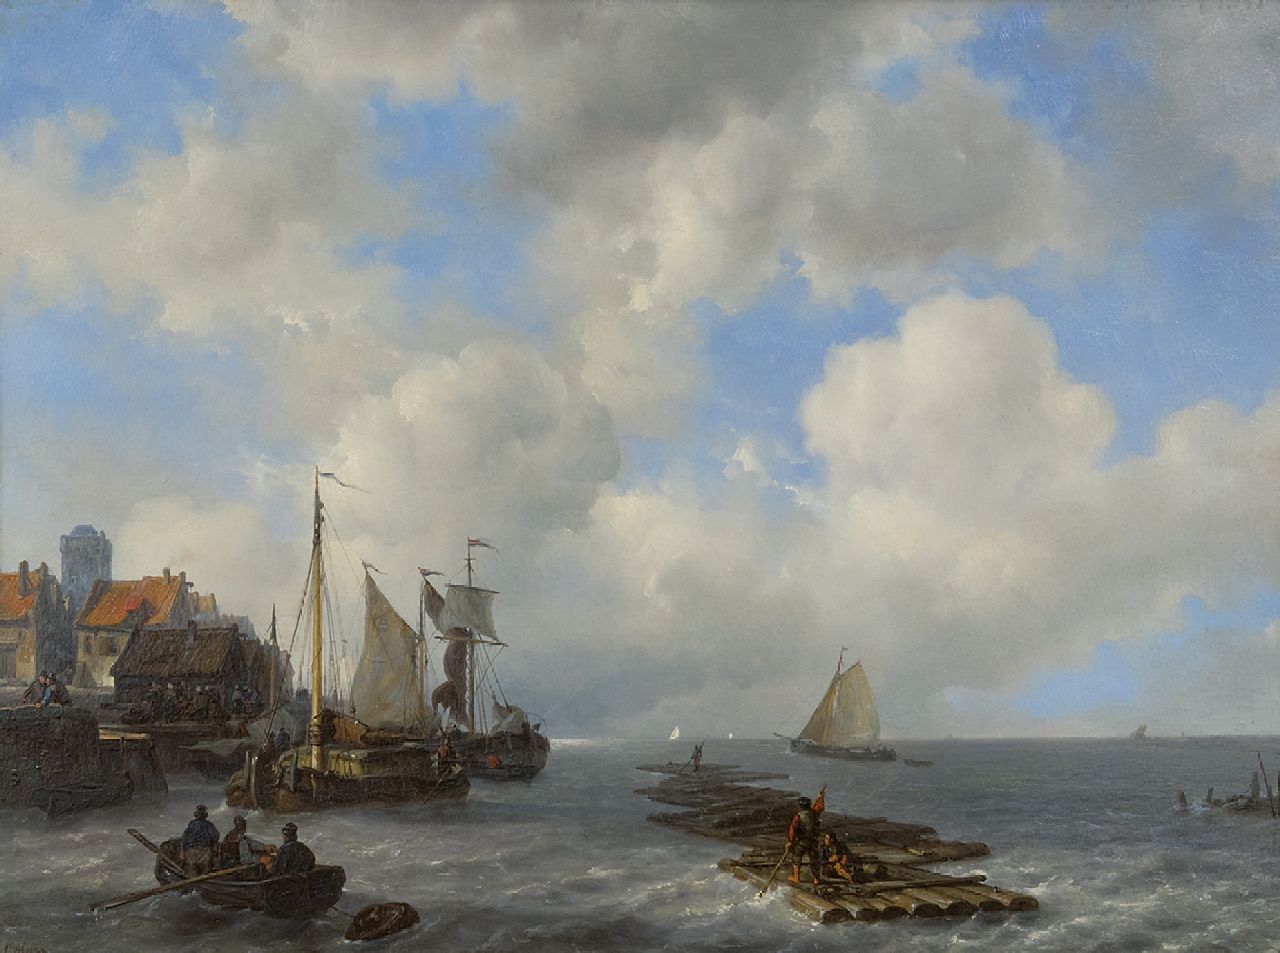 Meijer J.H.L.  | Johan Hendrik 'Louis' Meijer | Paintings offered for sale | Moored sailingvessels by a quay, oil on panel 46.8 x 61.8 cm, signed l.l. and dated 1841